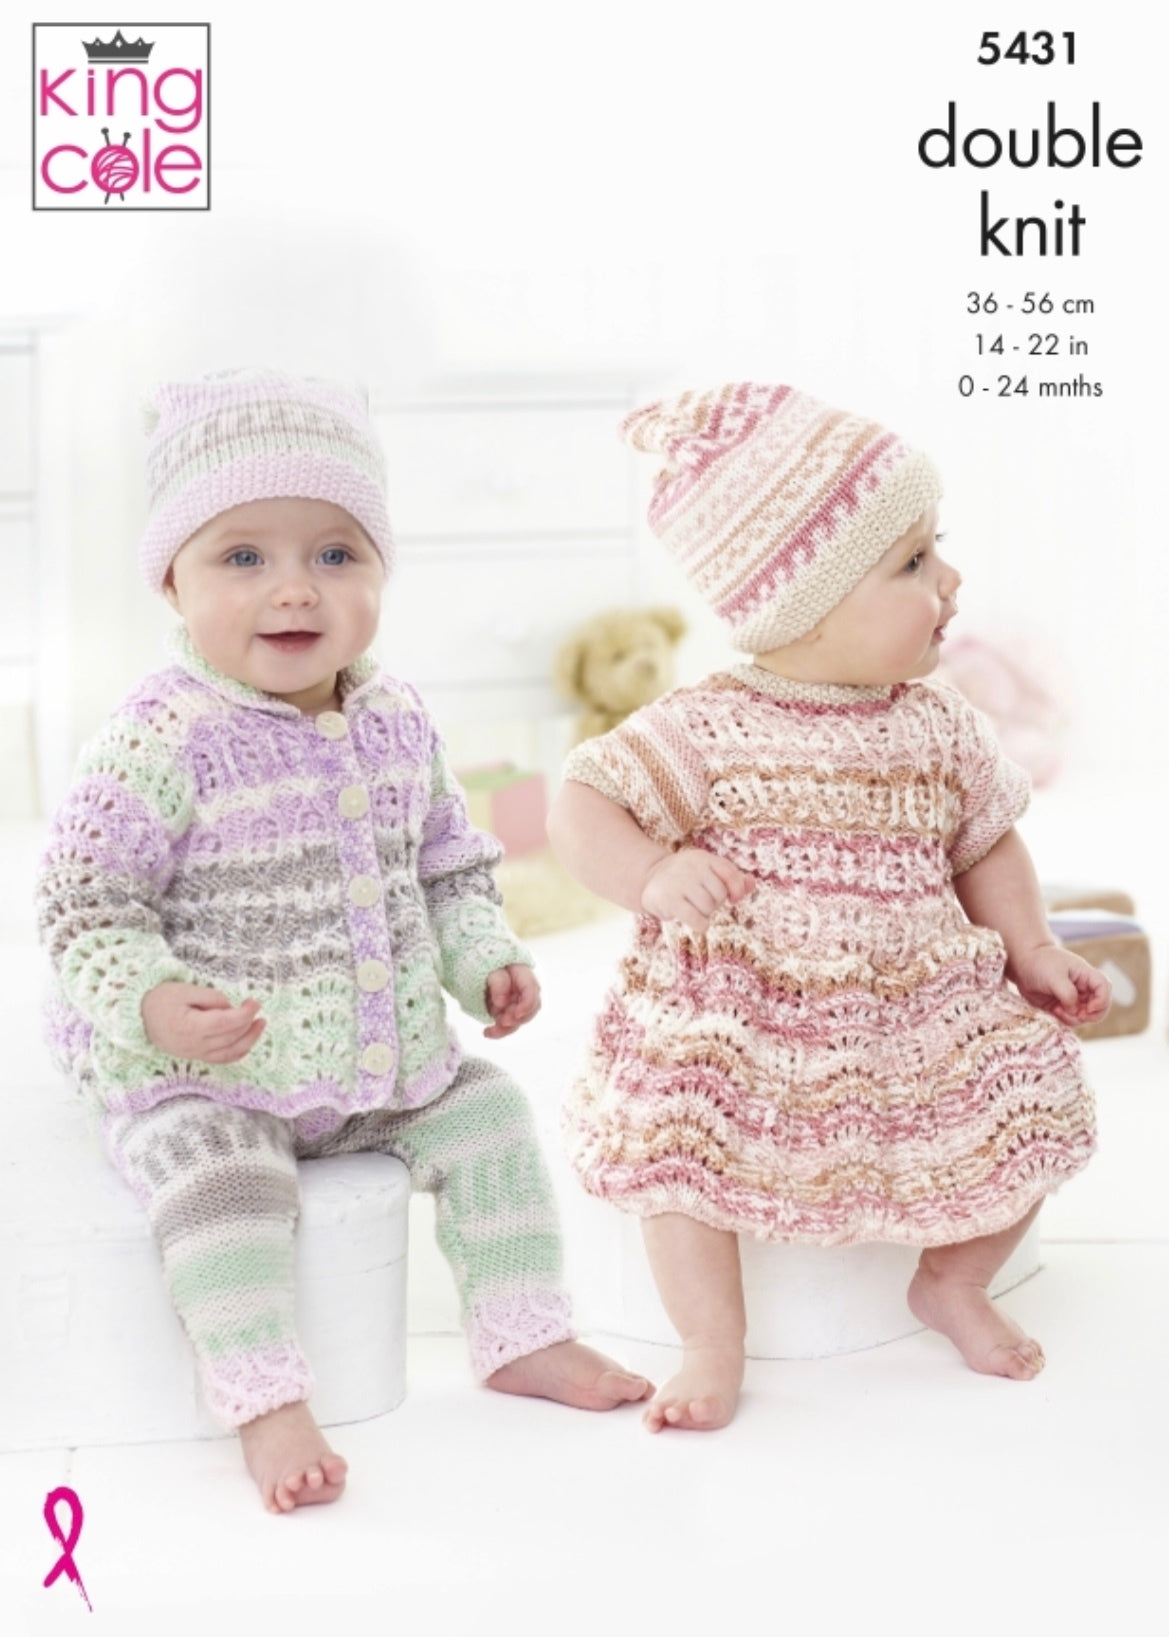 King Cole Pattern 5431 Baby Set in Cherish DK and Cherished DK